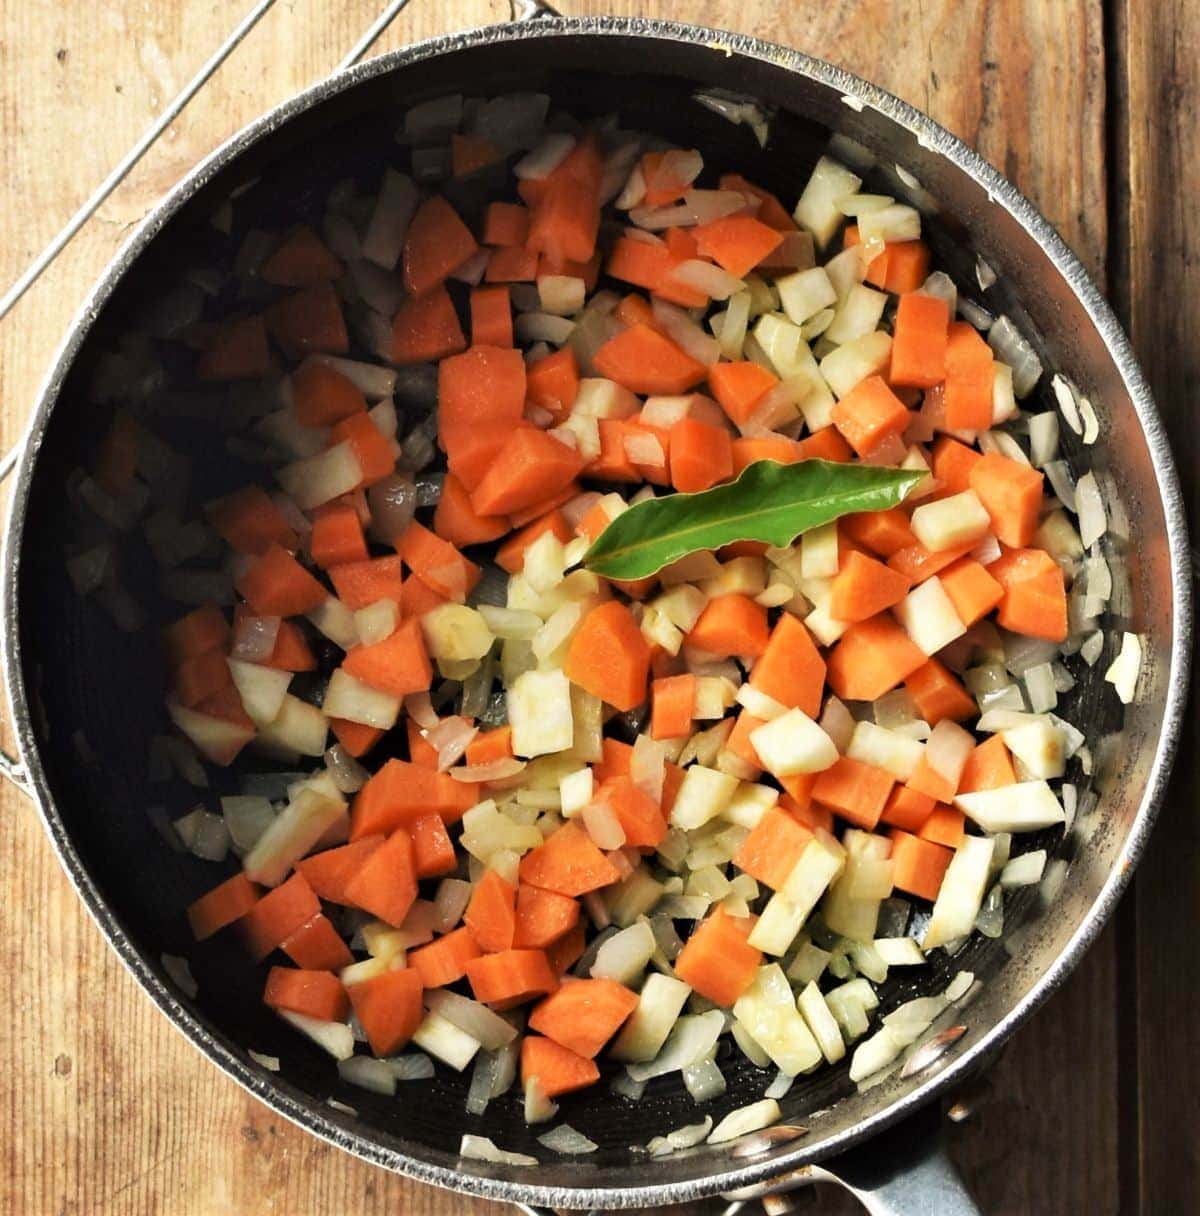 Chopped vegetables in large pot.